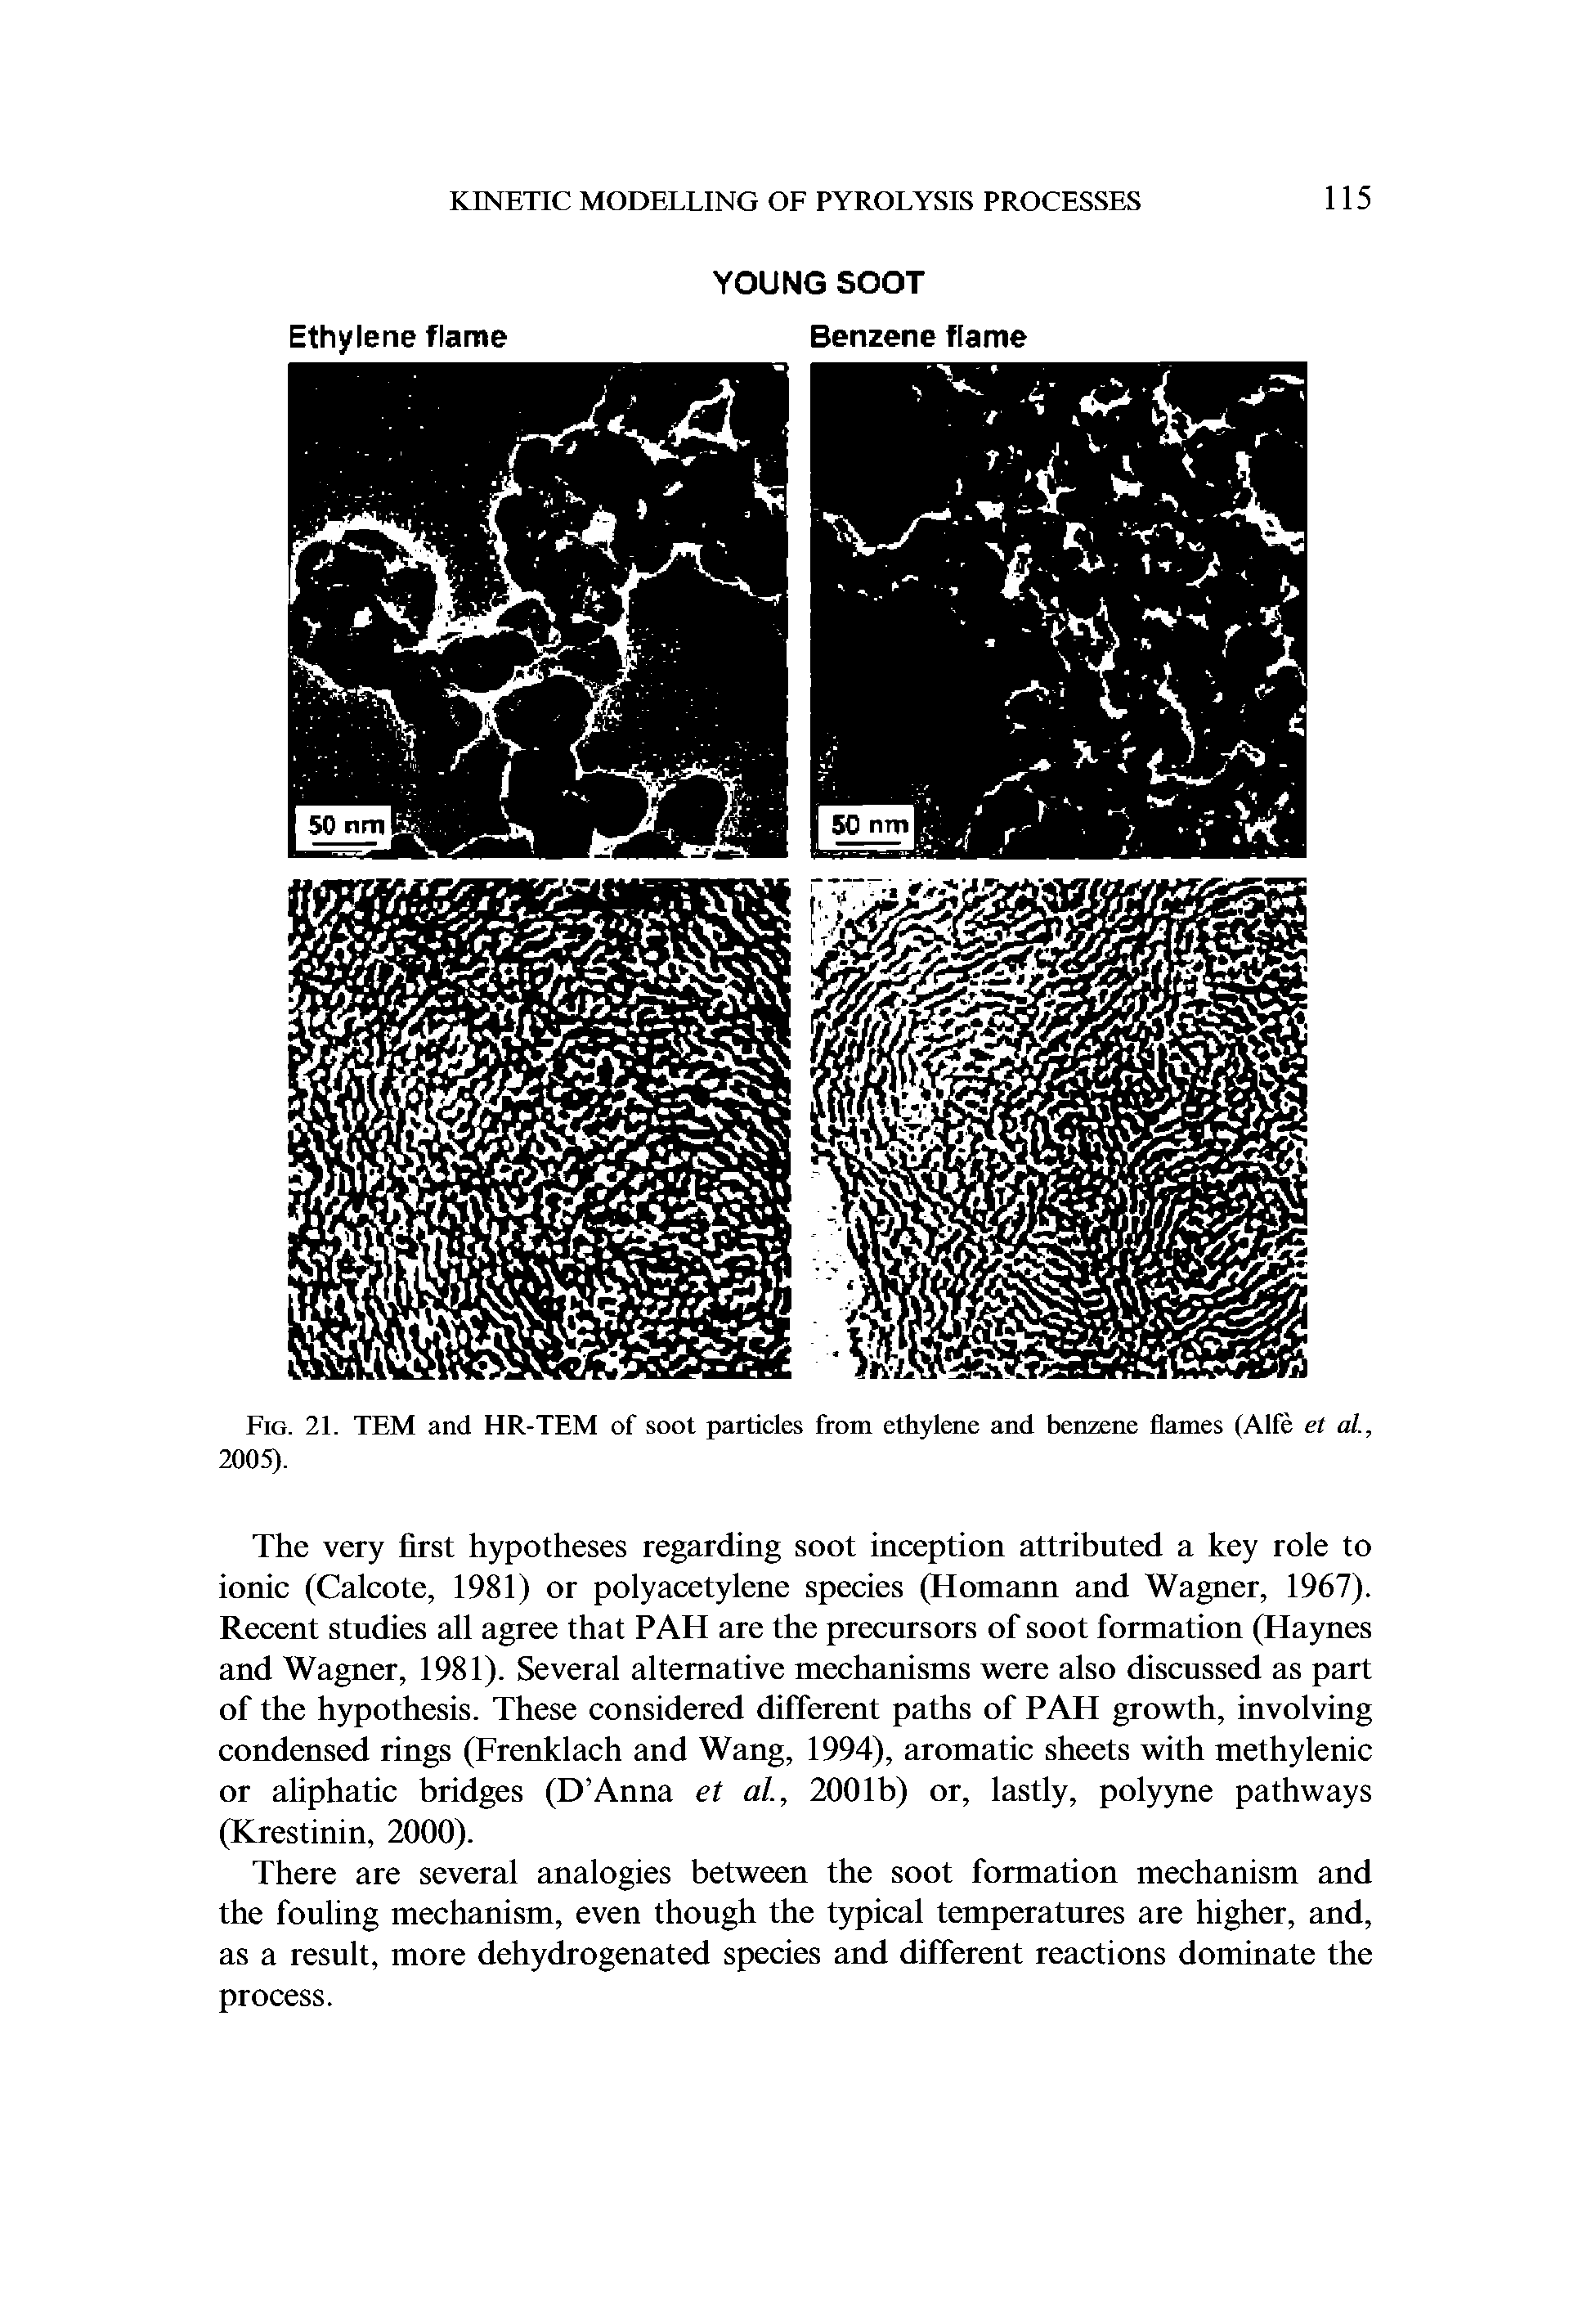 Fig. 21. TEM and HR-TEM of soot particles from ethylene and benzene flames (Alfe et al., 2005).